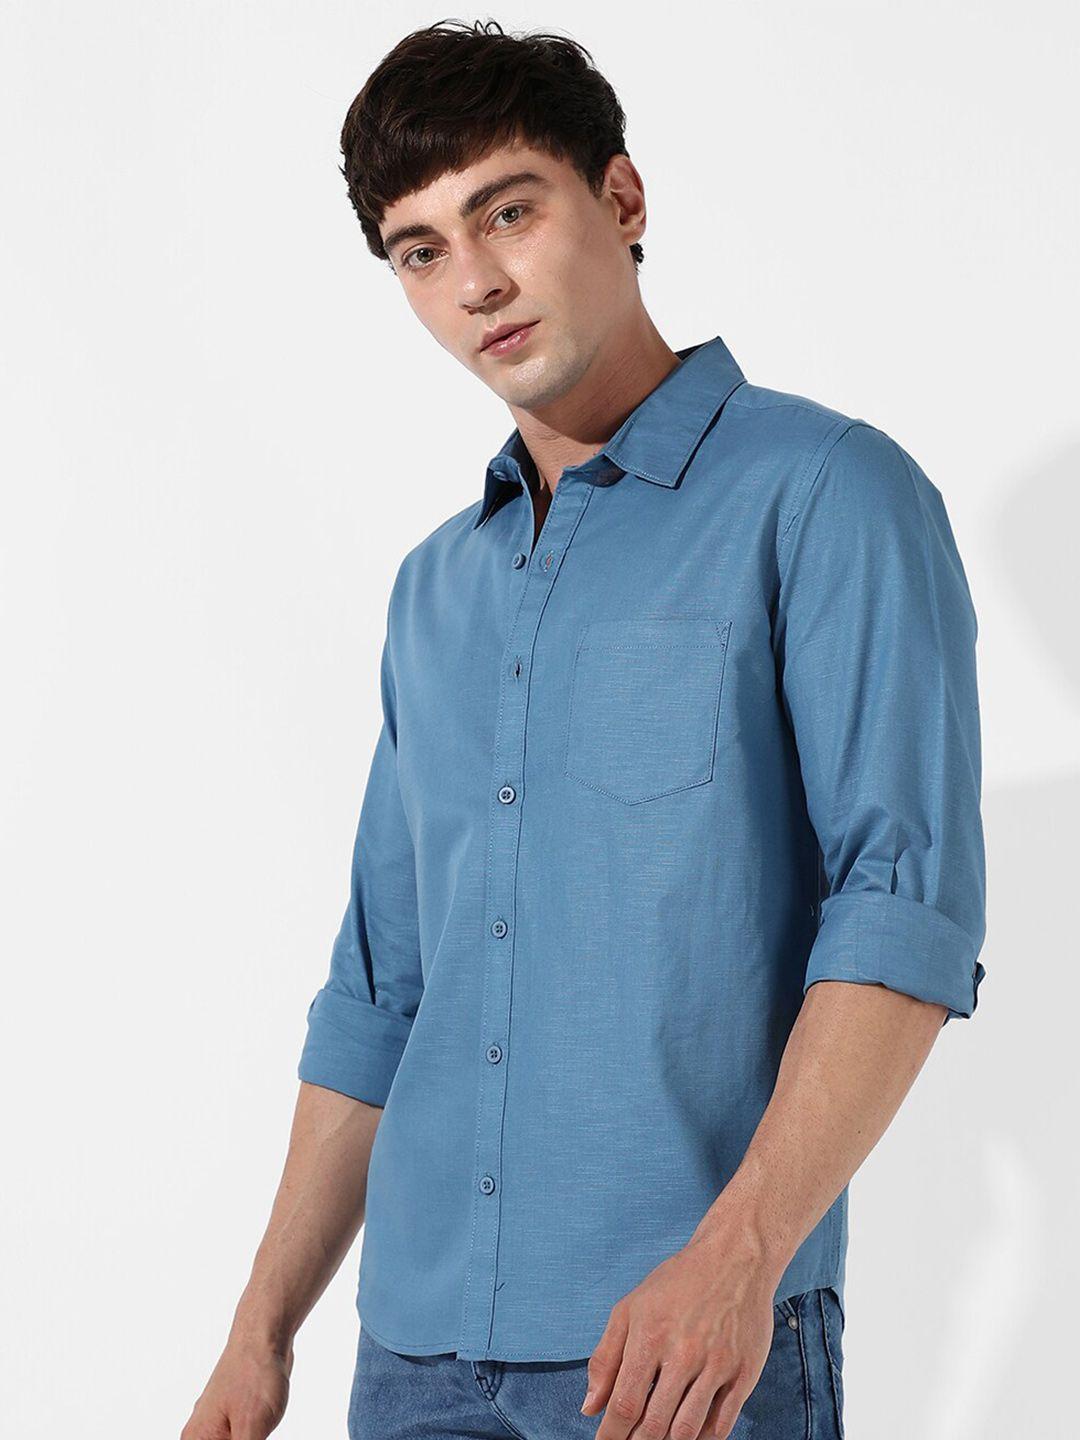 campus sutra blue classic cotton casual shirt